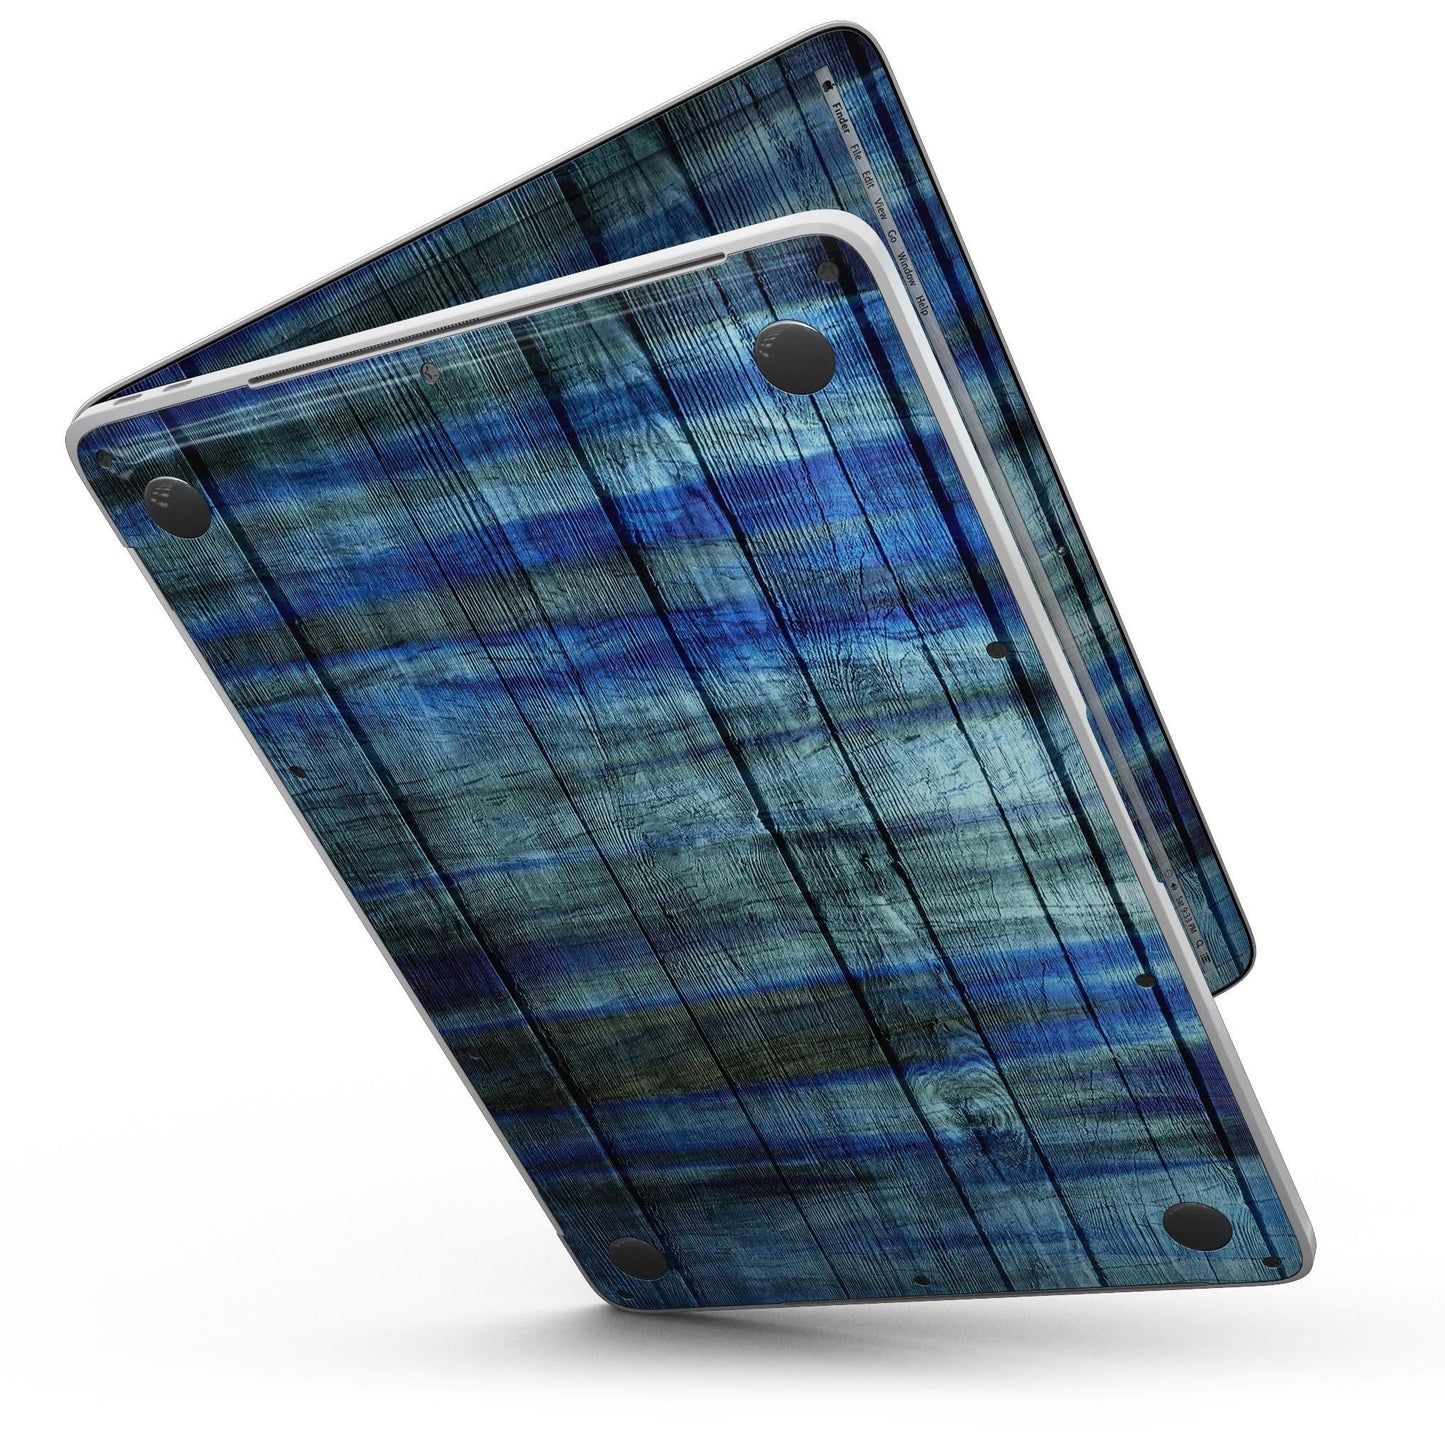 Blue and Green Tye-Dyed Wood - 13" MacBook Pro without Touch Bar Skin